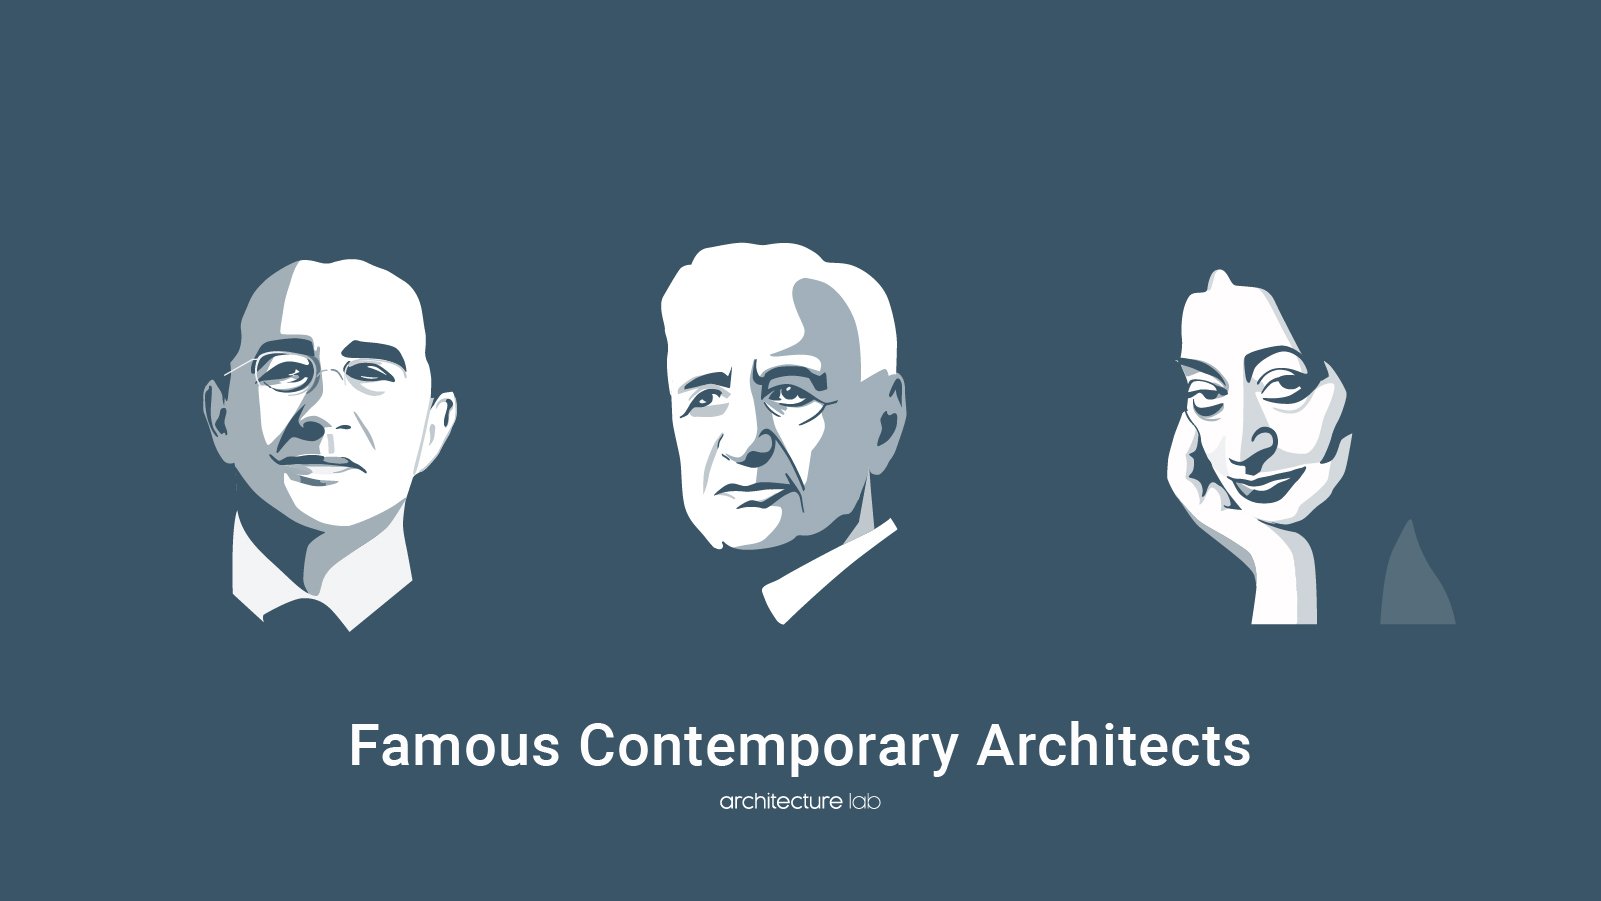 14 famous contemporary architects and their proud works